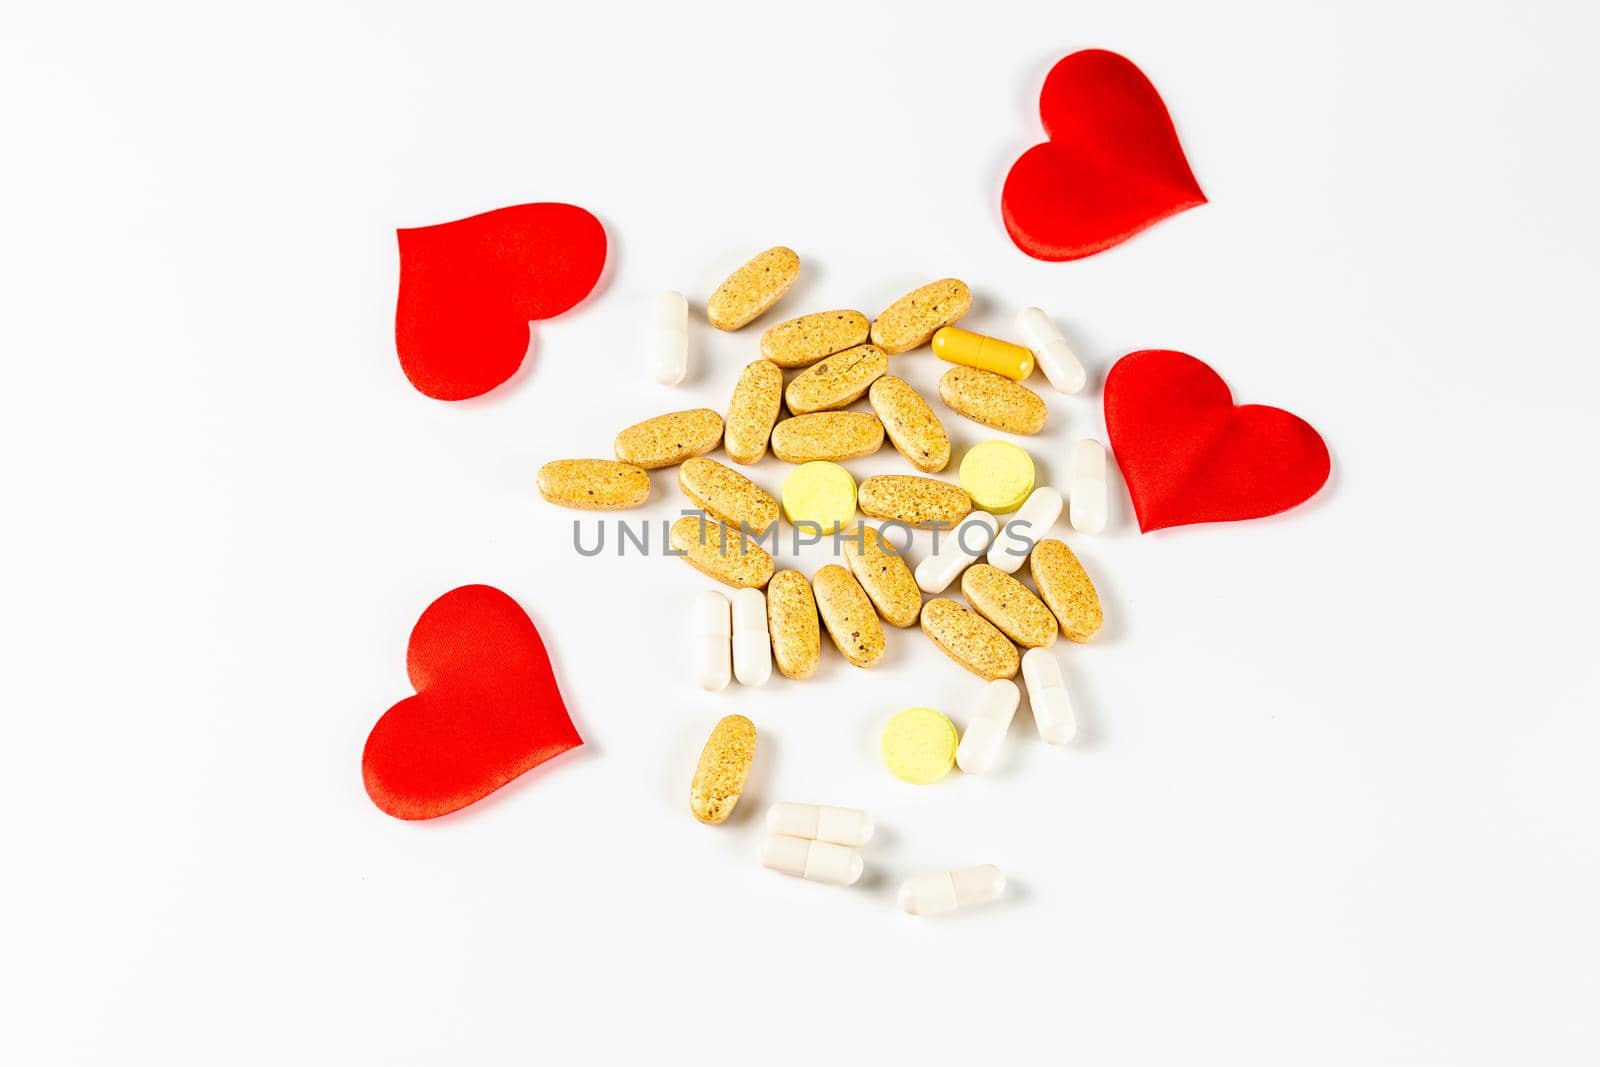 The hearts, tablets and pills isolated on white background by galinasharapova